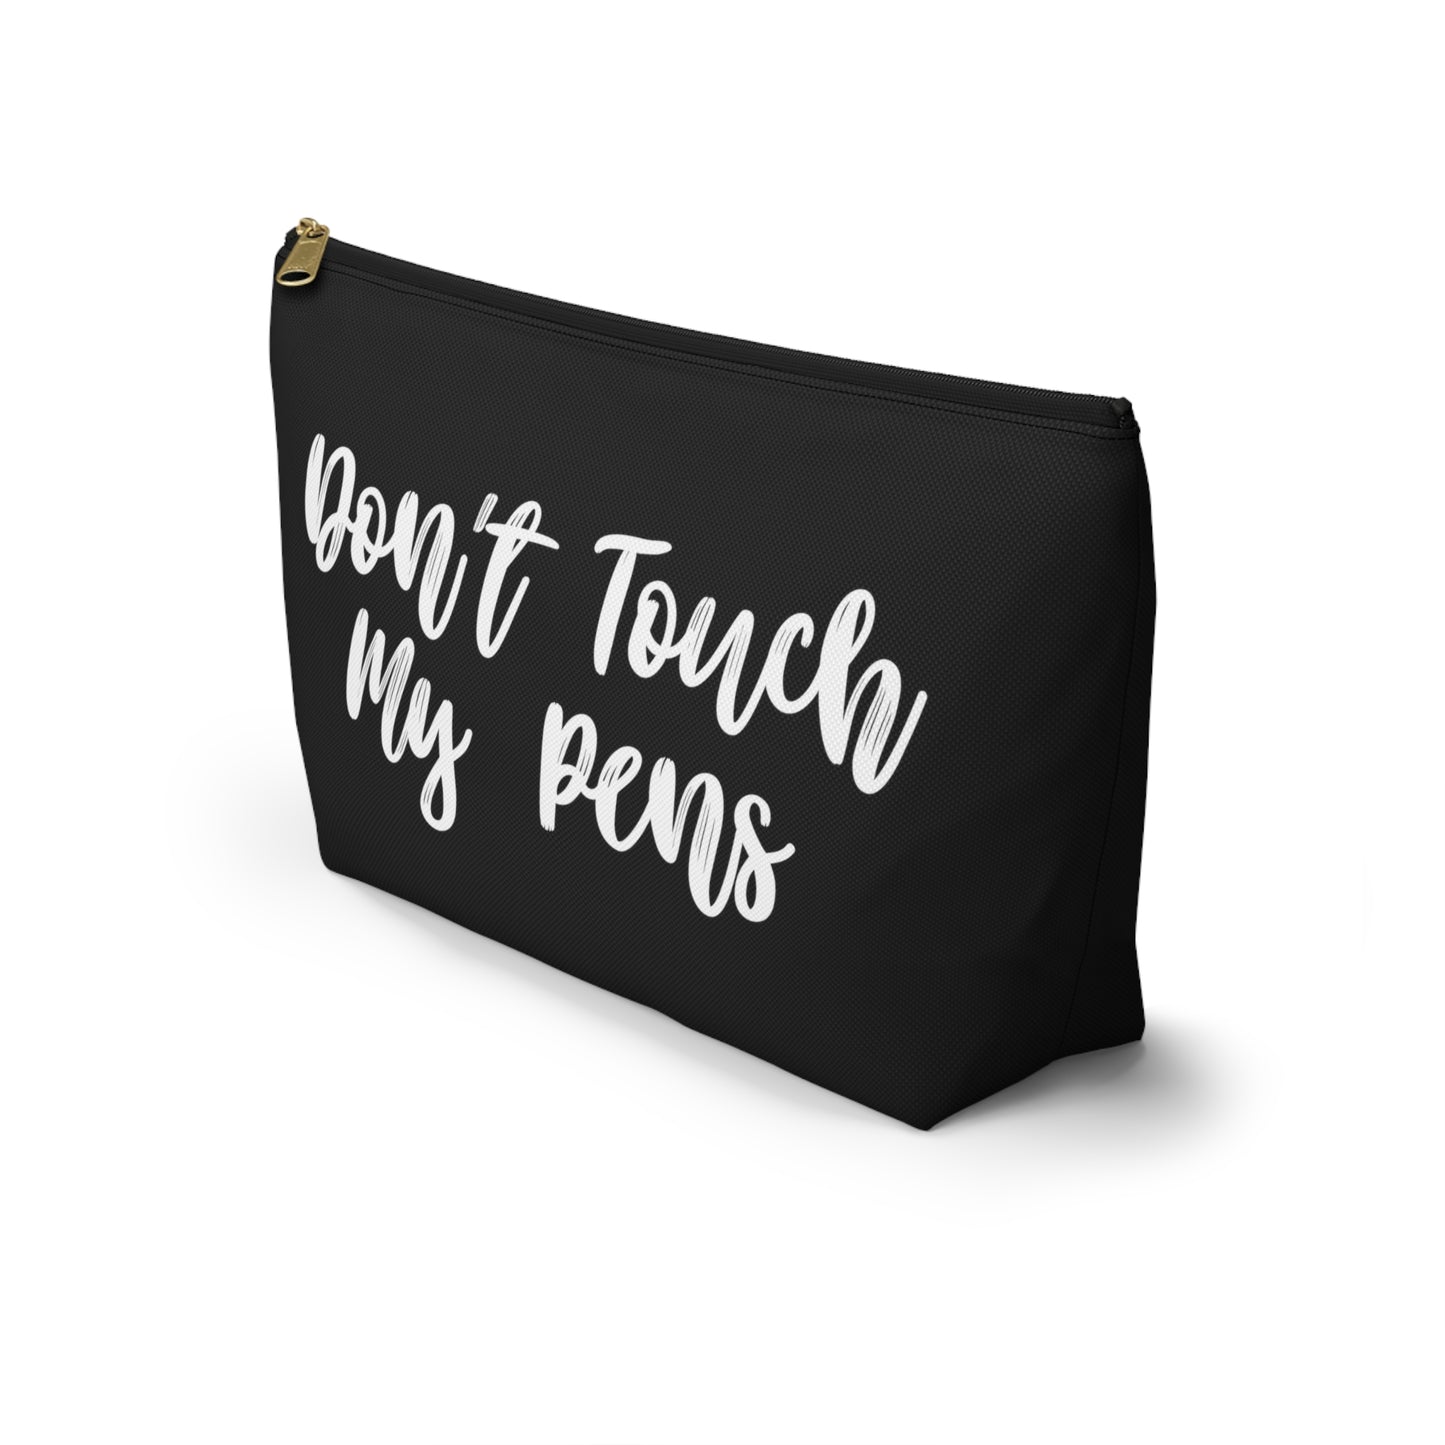 Don’t Touch My Pens Accessory Pouch w T-bottom